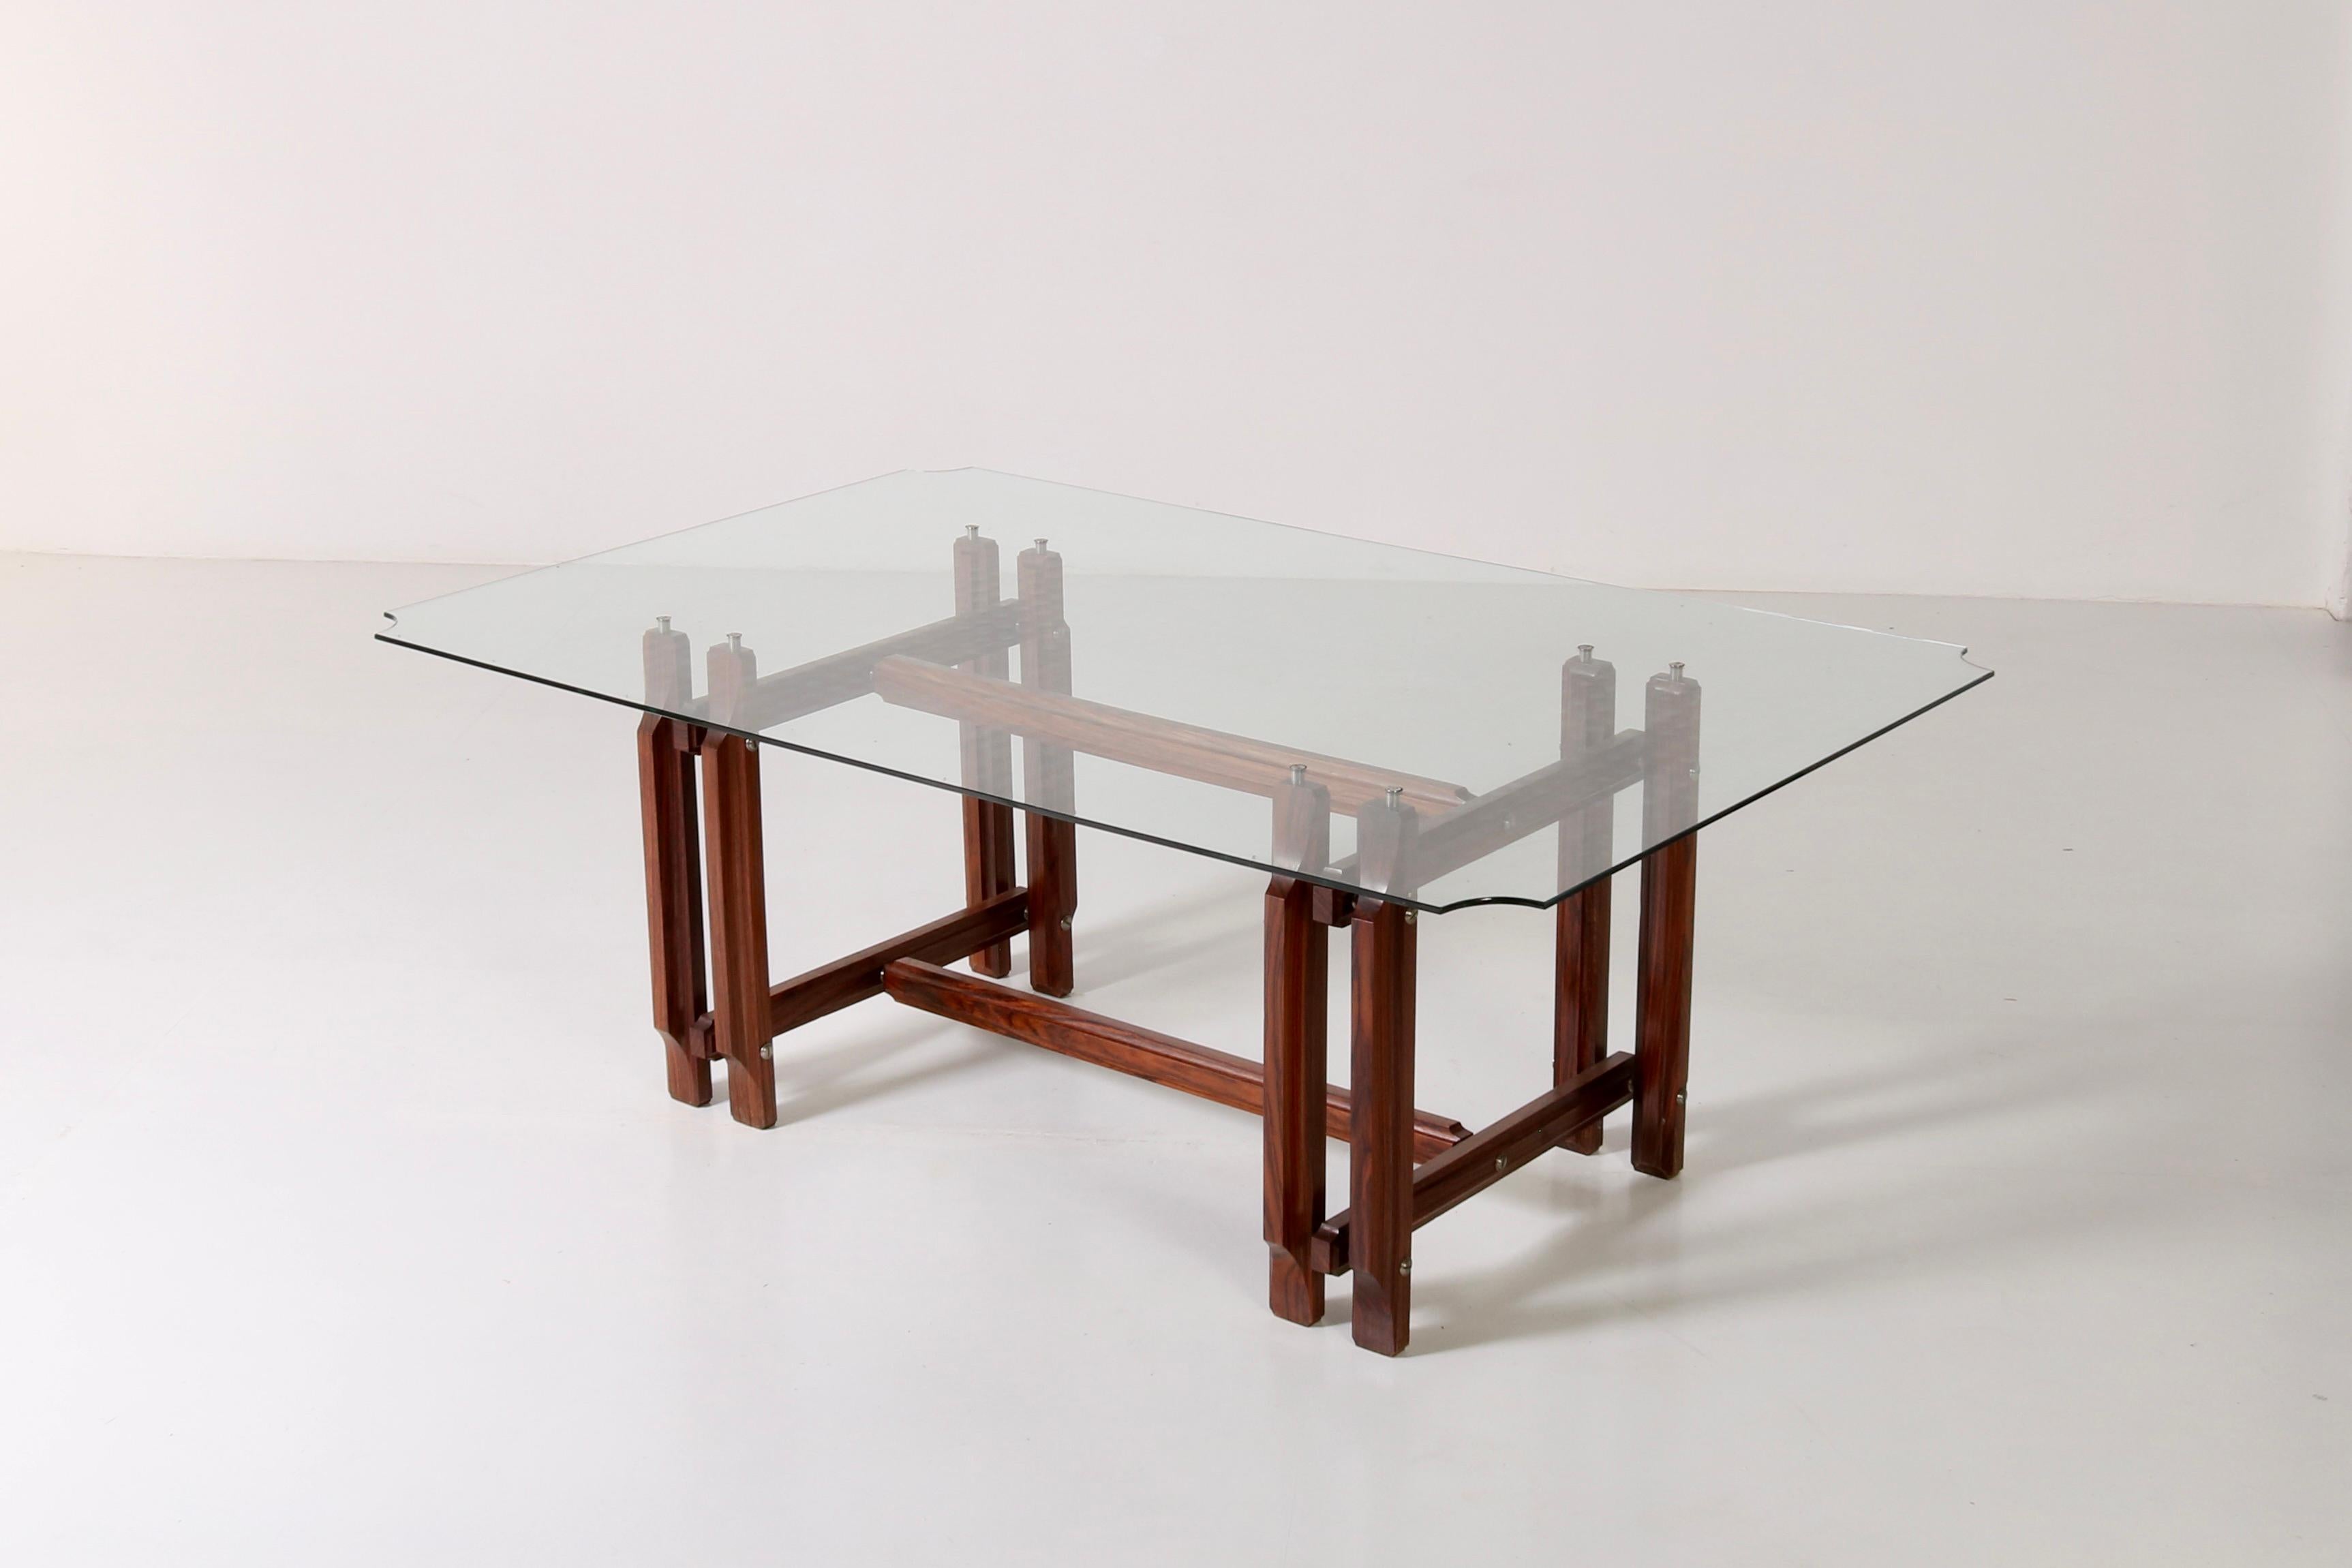 This table designed by Vittorio Dassi seamlessly blends meticulous craftsmanship and aesthetic research typically of 1960s Italian Design. Its sleek, minimalist silhouette is made in wood elegantly complemented by brushed metal details and tempered